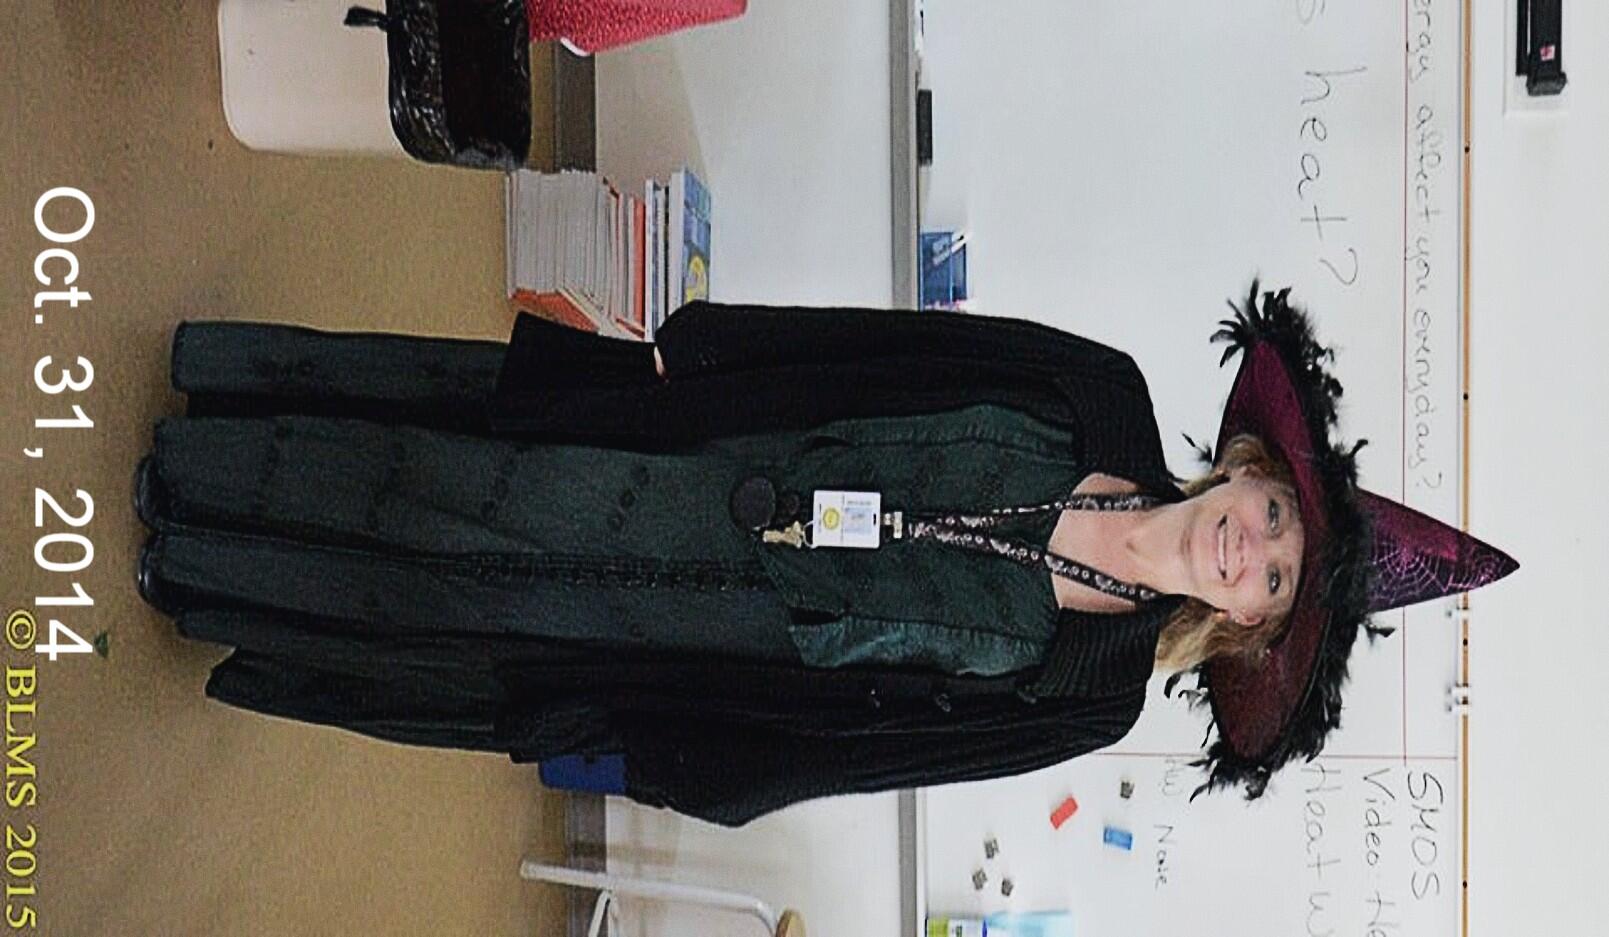 Mrs. Smith dressed as a witch. 